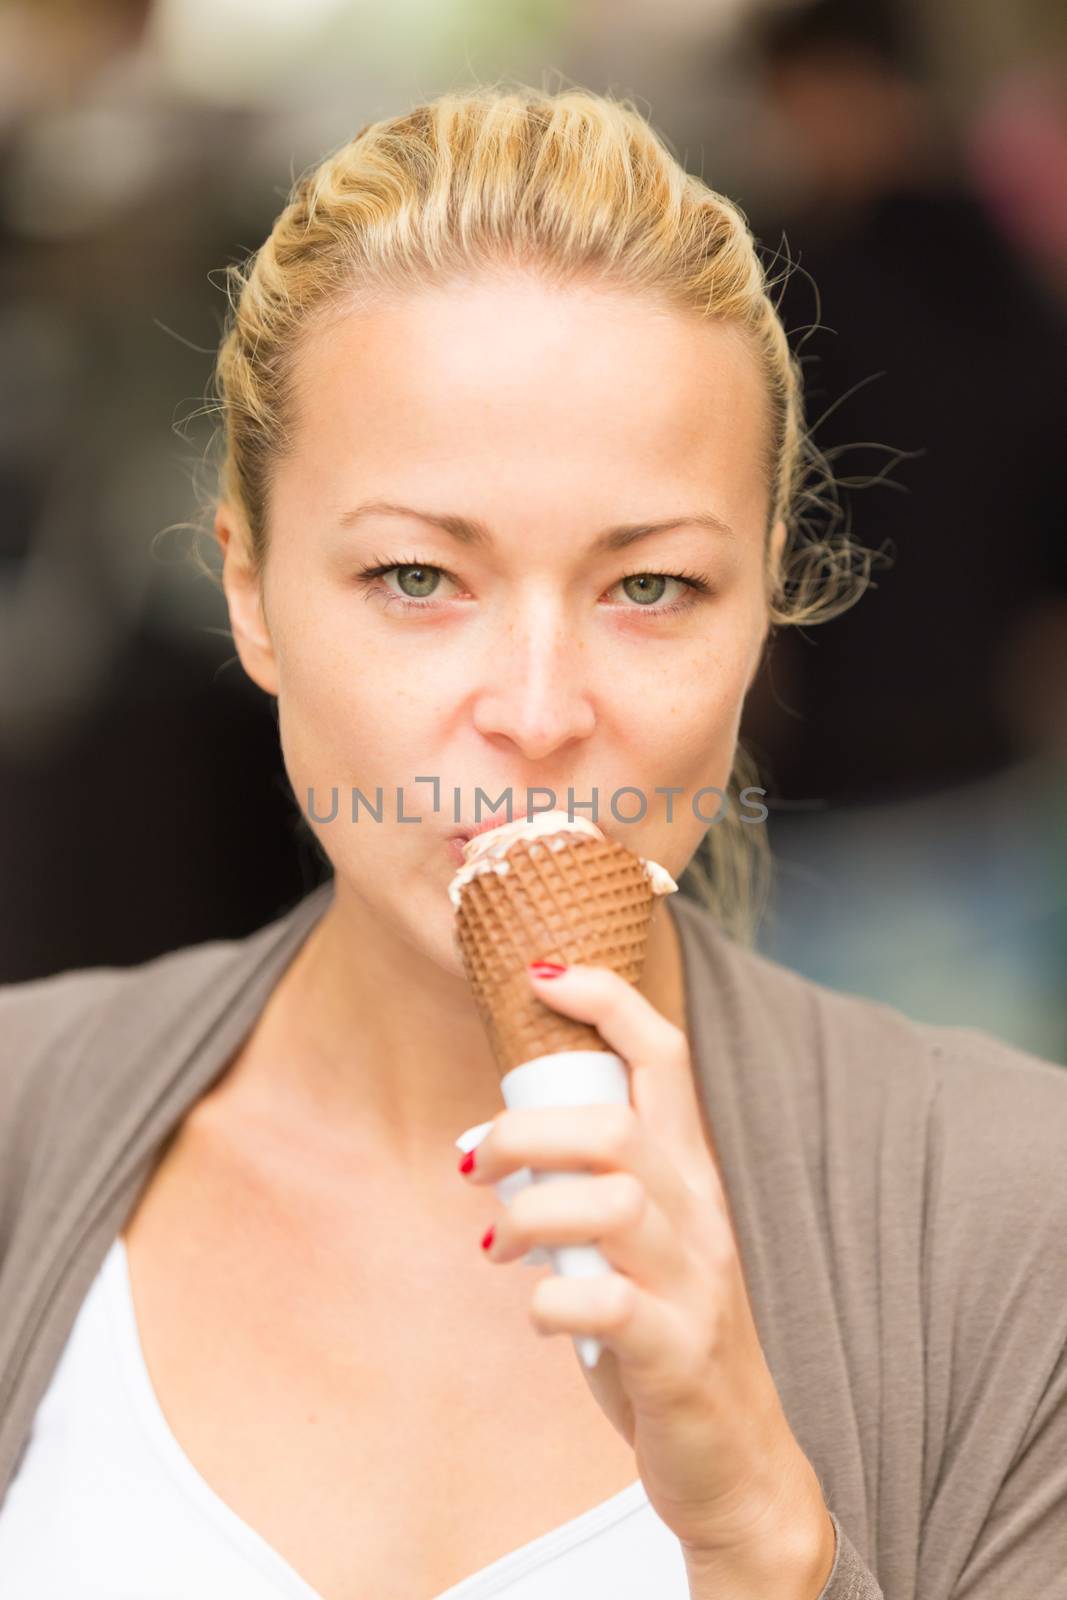 Casual blonde lady licking icecream in cone.